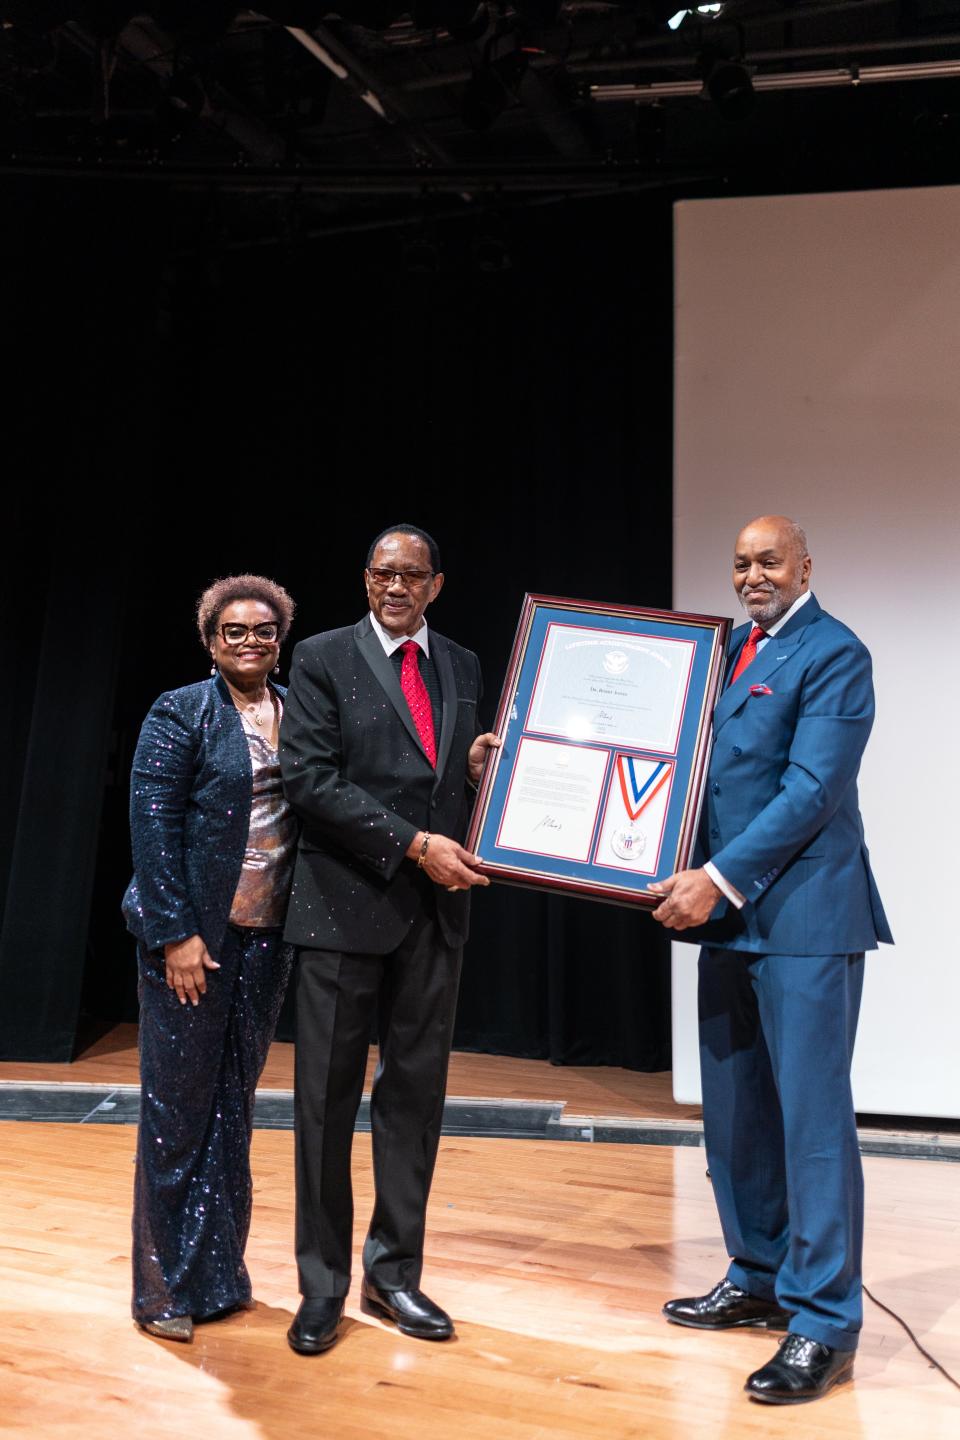 Dr. Bobby Jones receives the Americorps Points of Light Presidential Lifetime Achievement Award at the National Museum of African-American Music.